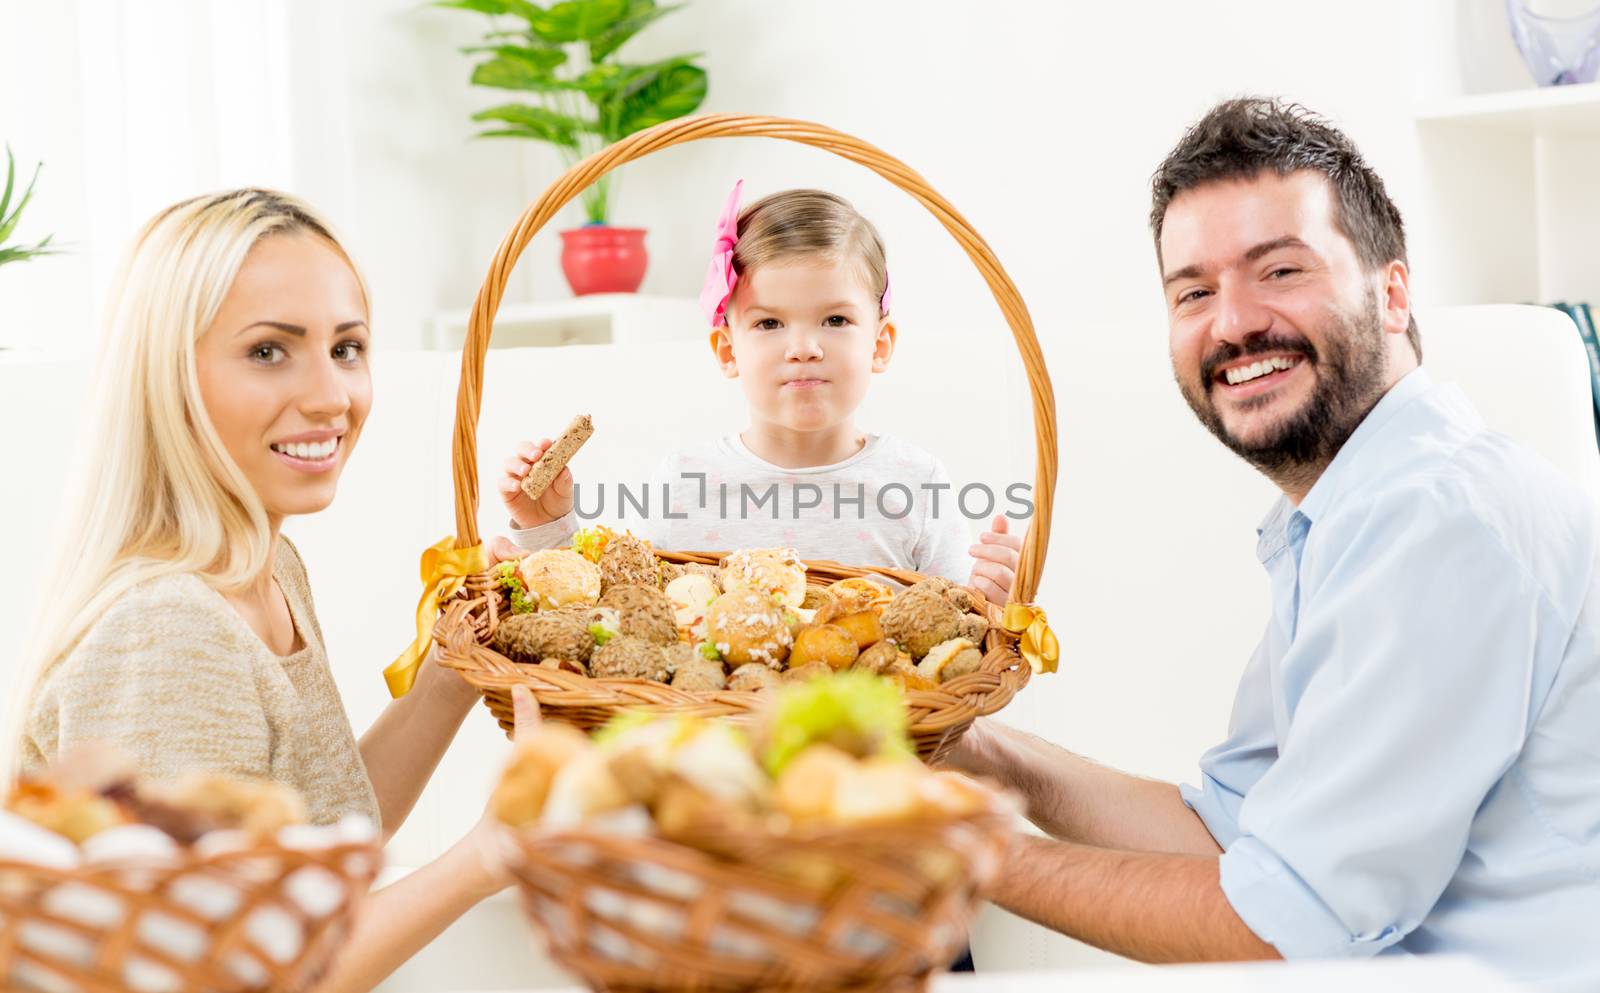 Young parents kneel in front of their little daughter, holding large woven basket with pastries, and with a smile looking at the camera.